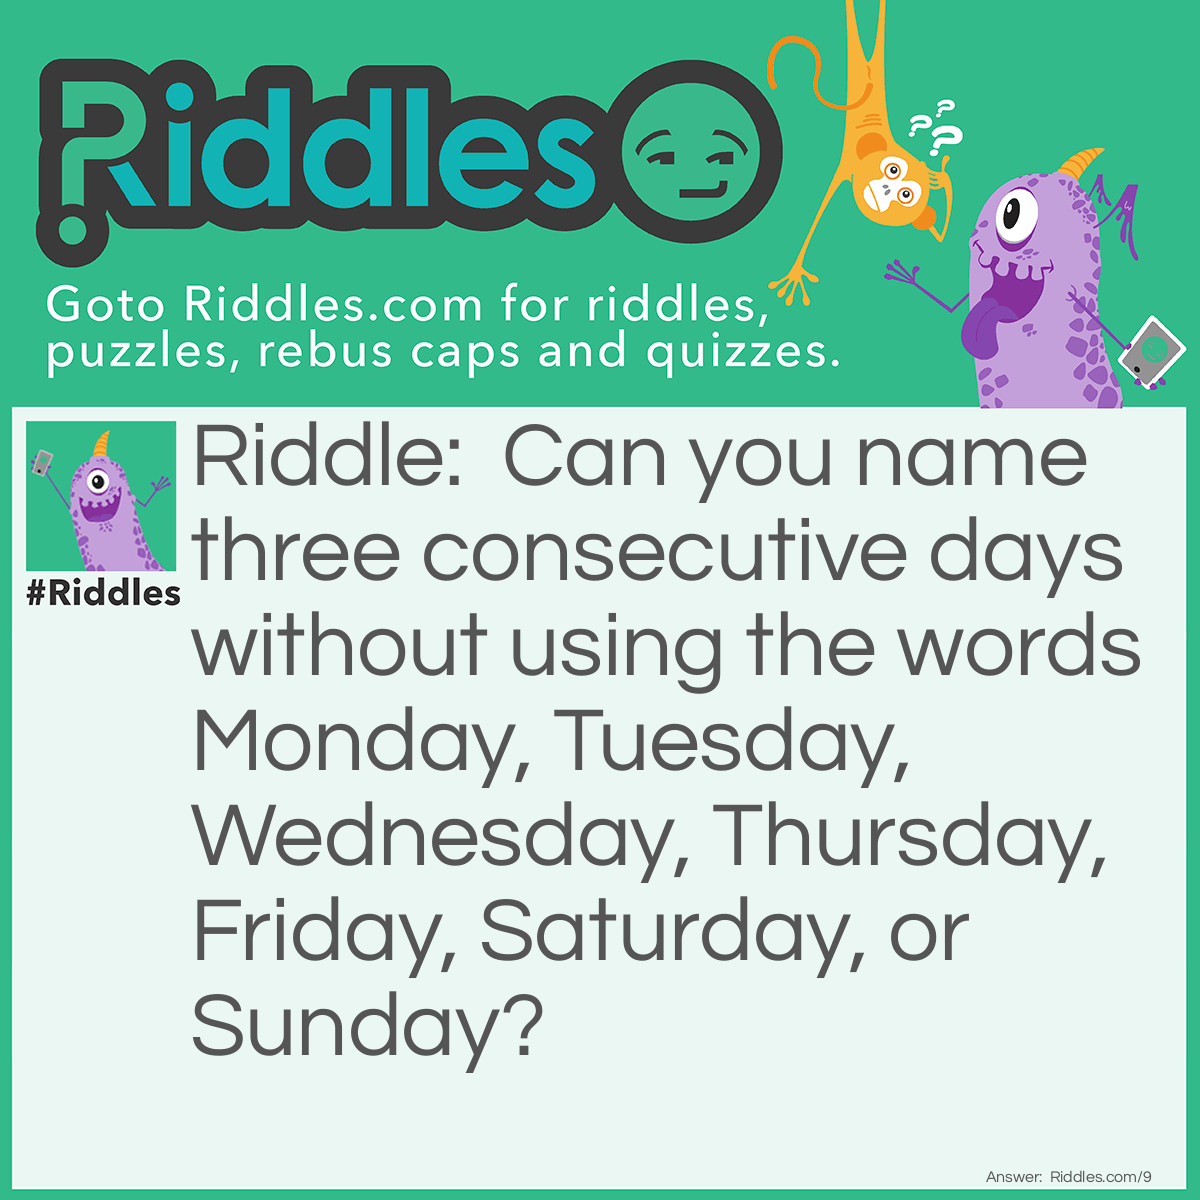 Riddle: Can you name three consecutive days without using the <a href="https://www.riddles.com/quiz/words">words</a> Monday, Tuesday, Wednesday, Thursday, Friday, Saturday, or Sunday? Answer: Yesterday, Today, and Tomorrow.